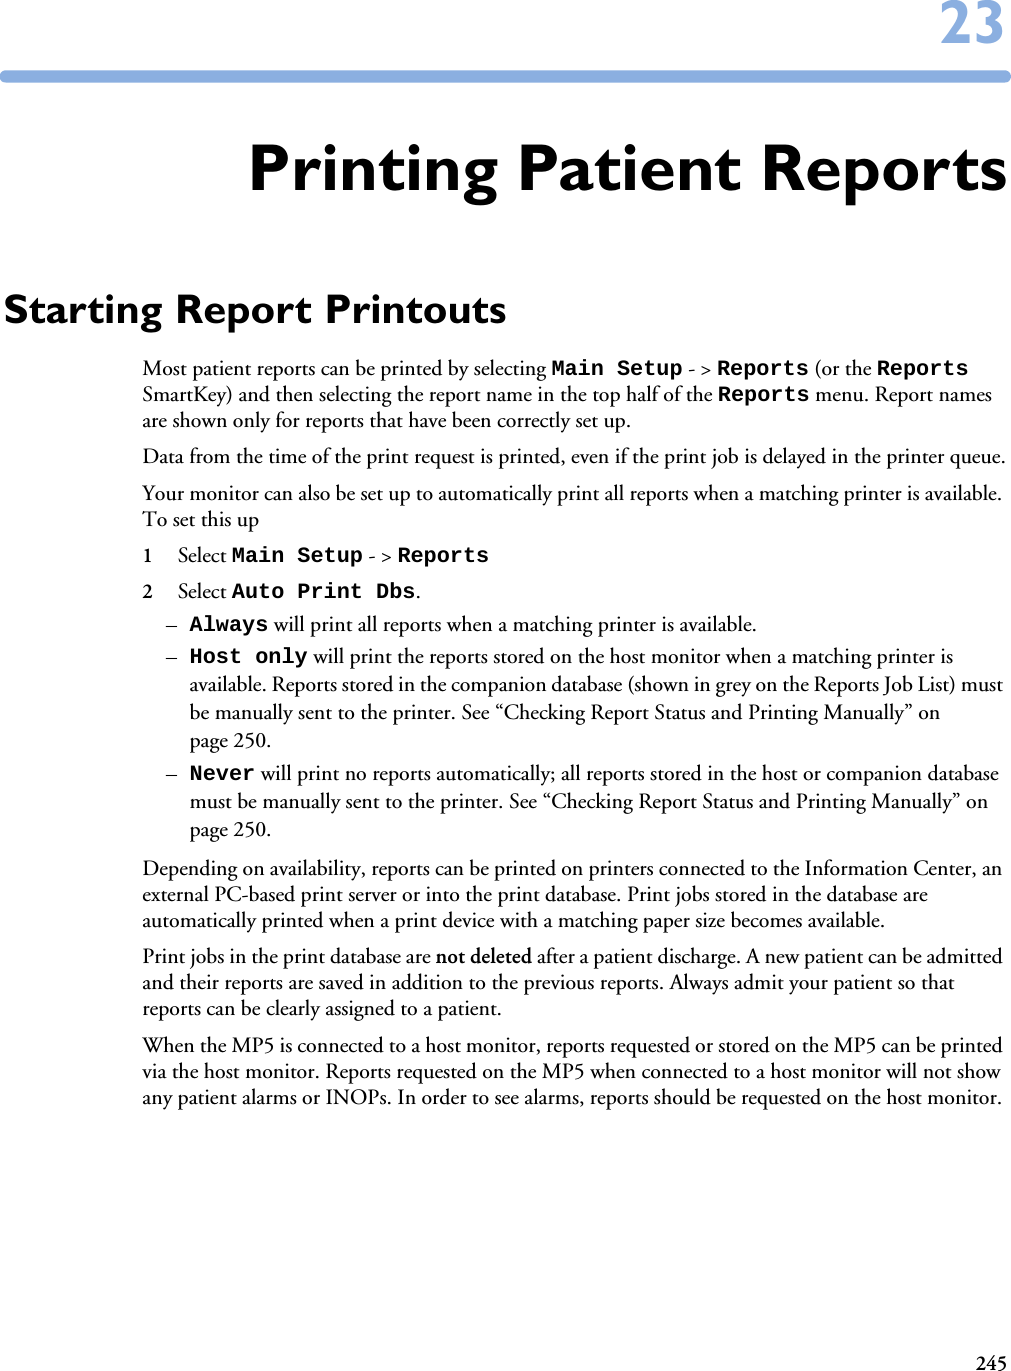 2452323Printing Patient ReportsStarting Report PrintoutsMost patient reports can be printed by selecting Main Setup - &gt; Reports (or the Reports SmartKey) and then selecting the report name in the top half of the Reports menu. Report names are shown only for reports that have been correctly set up. Data from the time of the print request is printed, even if the print job is delayed in the printer queue.Your monitor can also be set up to automatically print all reports when a matching printer is available. To set this up 1Select Main Setup - &gt; Reports 2Select Auto Print Dbs. –Always will print all reports when a matching printer is available. –Host only will print the reports stored on the host monitor when a matching printer is available. Reports stored in the companion database (shown in grey on the Reports Job List) must be manually sent to the printer. See “Checking Report Status and Printing Manually” on page 250.–Never will print no reports automatically; all reports stored in the host or companion database must be manually sent to the printer. See “Checking Report Status and Printing Manually” on page 250.Depending on availability, reports can be printed on printers connected to the Information Center, an external PC-based print server or into the print database. Print jobs stored in the database are automatically printed when a print device with a matching paper size becomes available. Print jobs in the print database are not deleted after a patient discharge. A new patient can be admitted and their reports are saved in addition to the previous reports. Always admit your patient so that reports can be clearly assigned to a patient. When the MP5 is connected to a host monitor, reports requested or stored on the MP5 can be printed via the host monitor. Reports requested on the MP5 when connected to a host monitor will not show any patient alarms or INOPs. In order to see alarms, reports should be requested on the host monitor. 